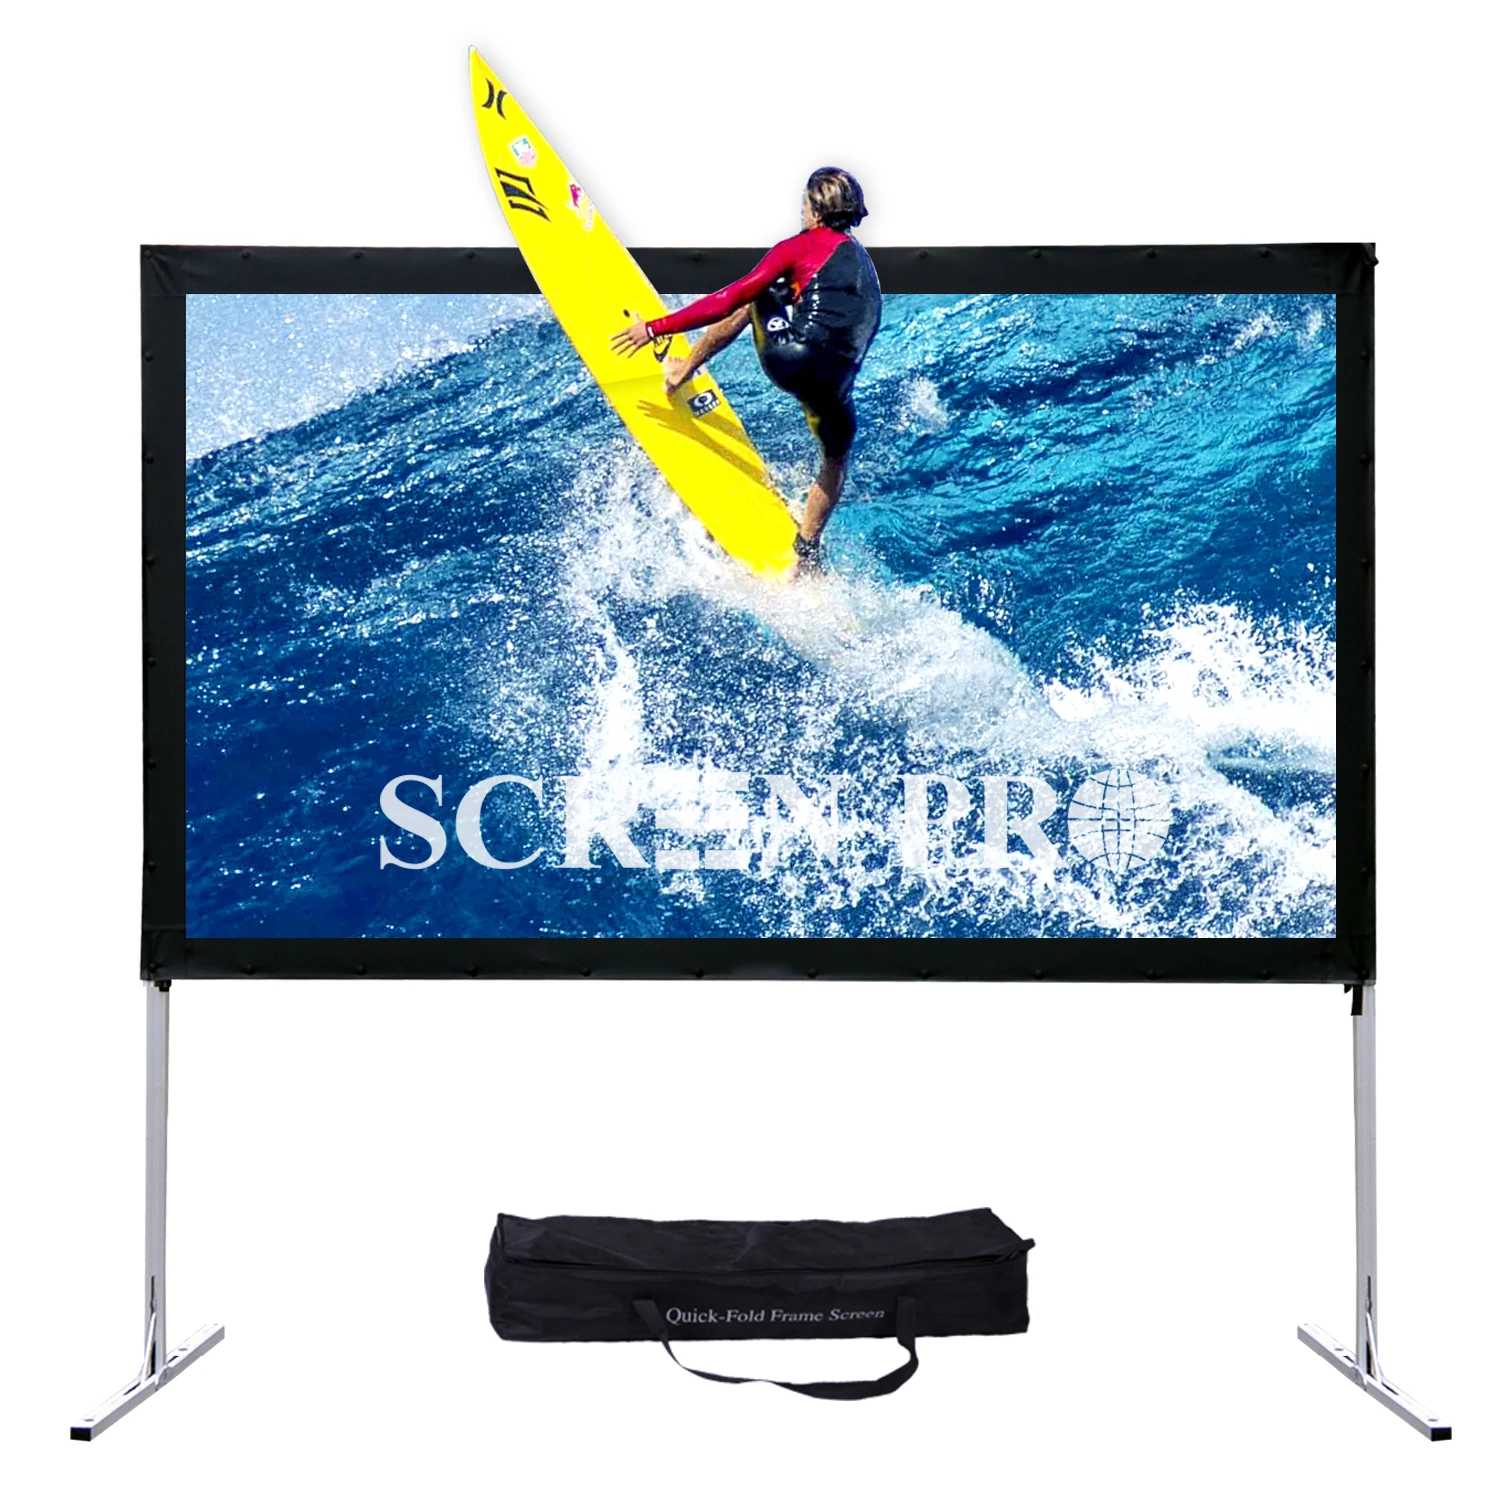 

Screenpro 100inch rear grey Portable Indoor/Outdoor Movie Theater Projector Screen with Stand Legs and Carry Bag, Aluminum frame